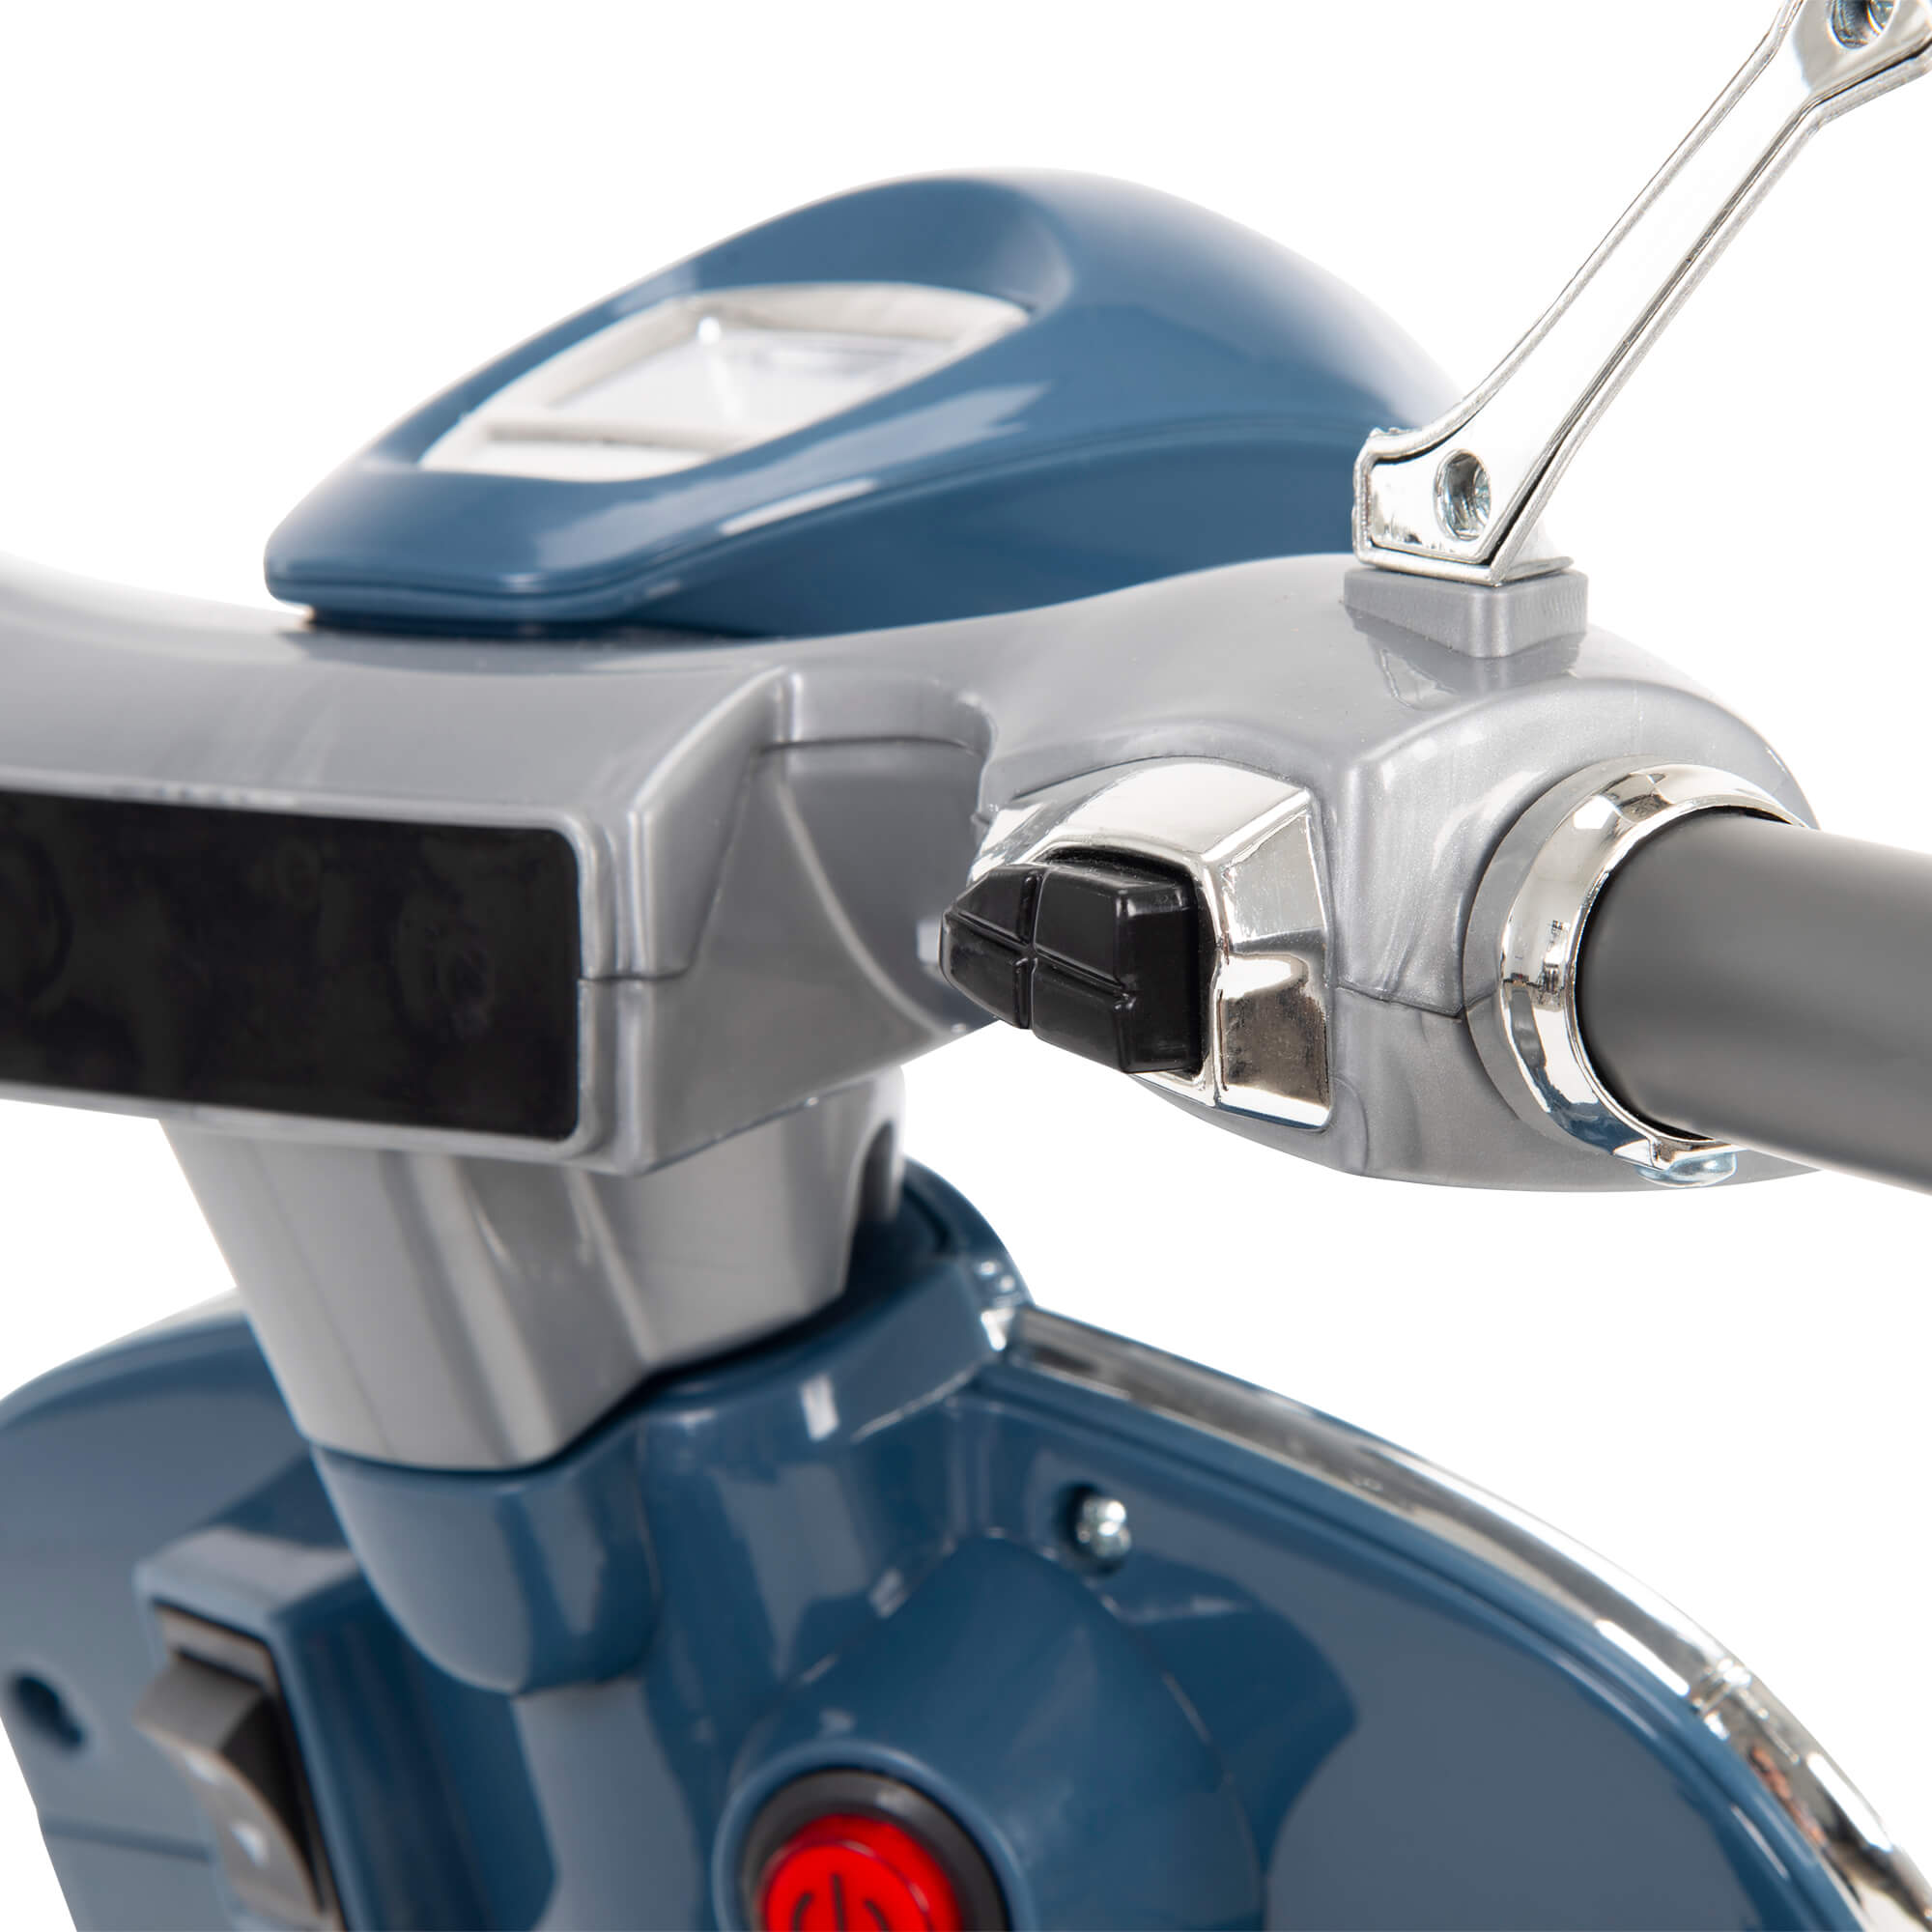 Huffy 6V Vespa Ride-On Electric Scooter for Kids, Blue - image 3 of 7